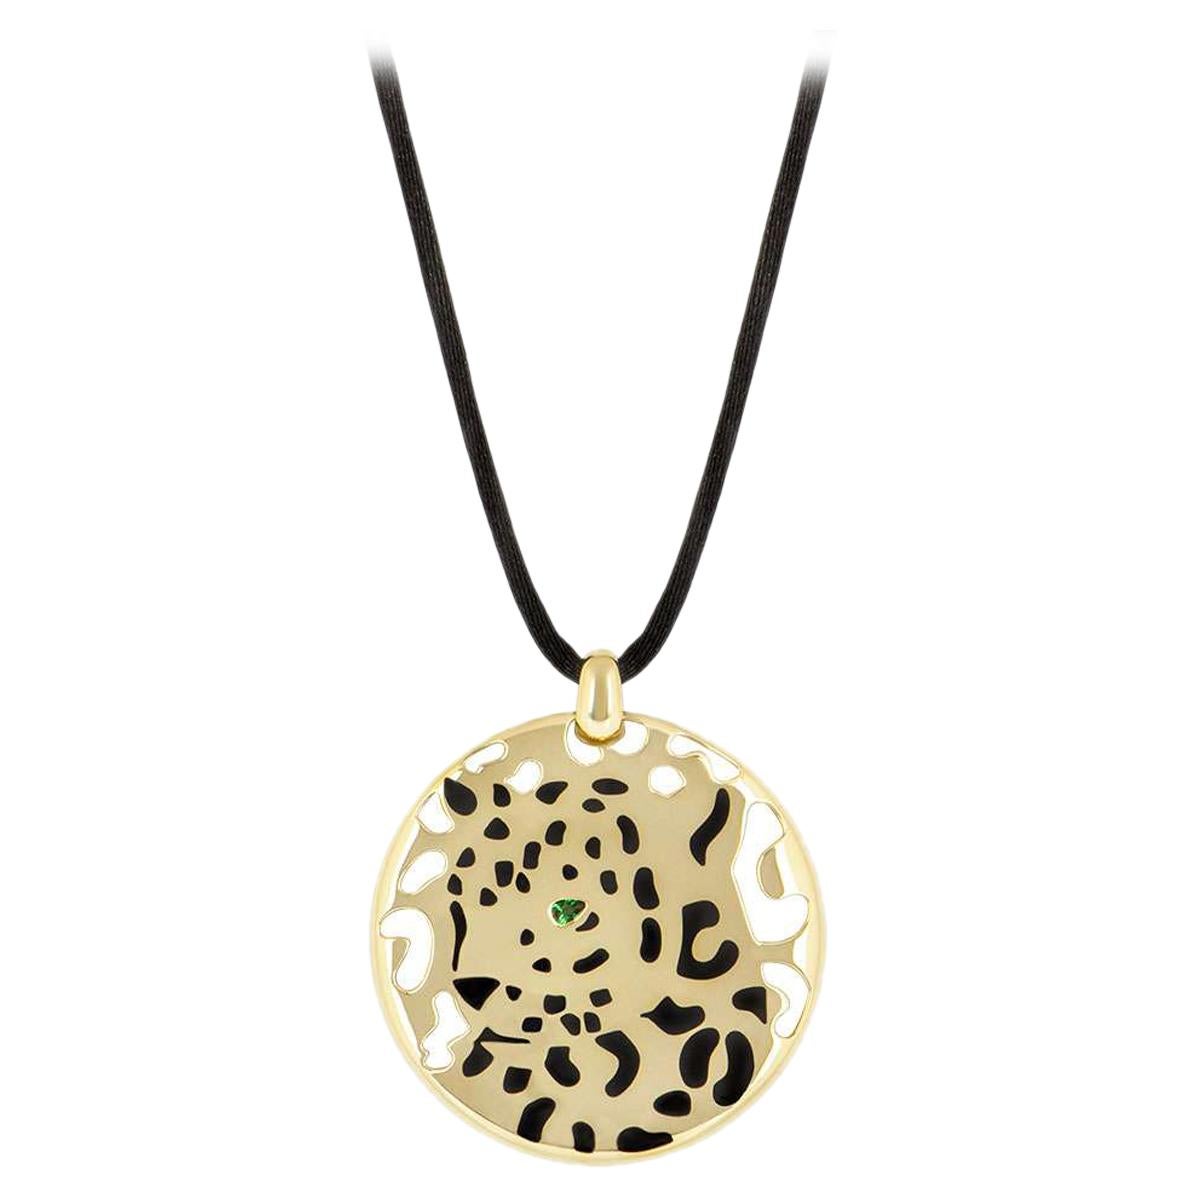 Cartier Circular Motif Panthere Necklace in Black Lacquer and Tsavorite